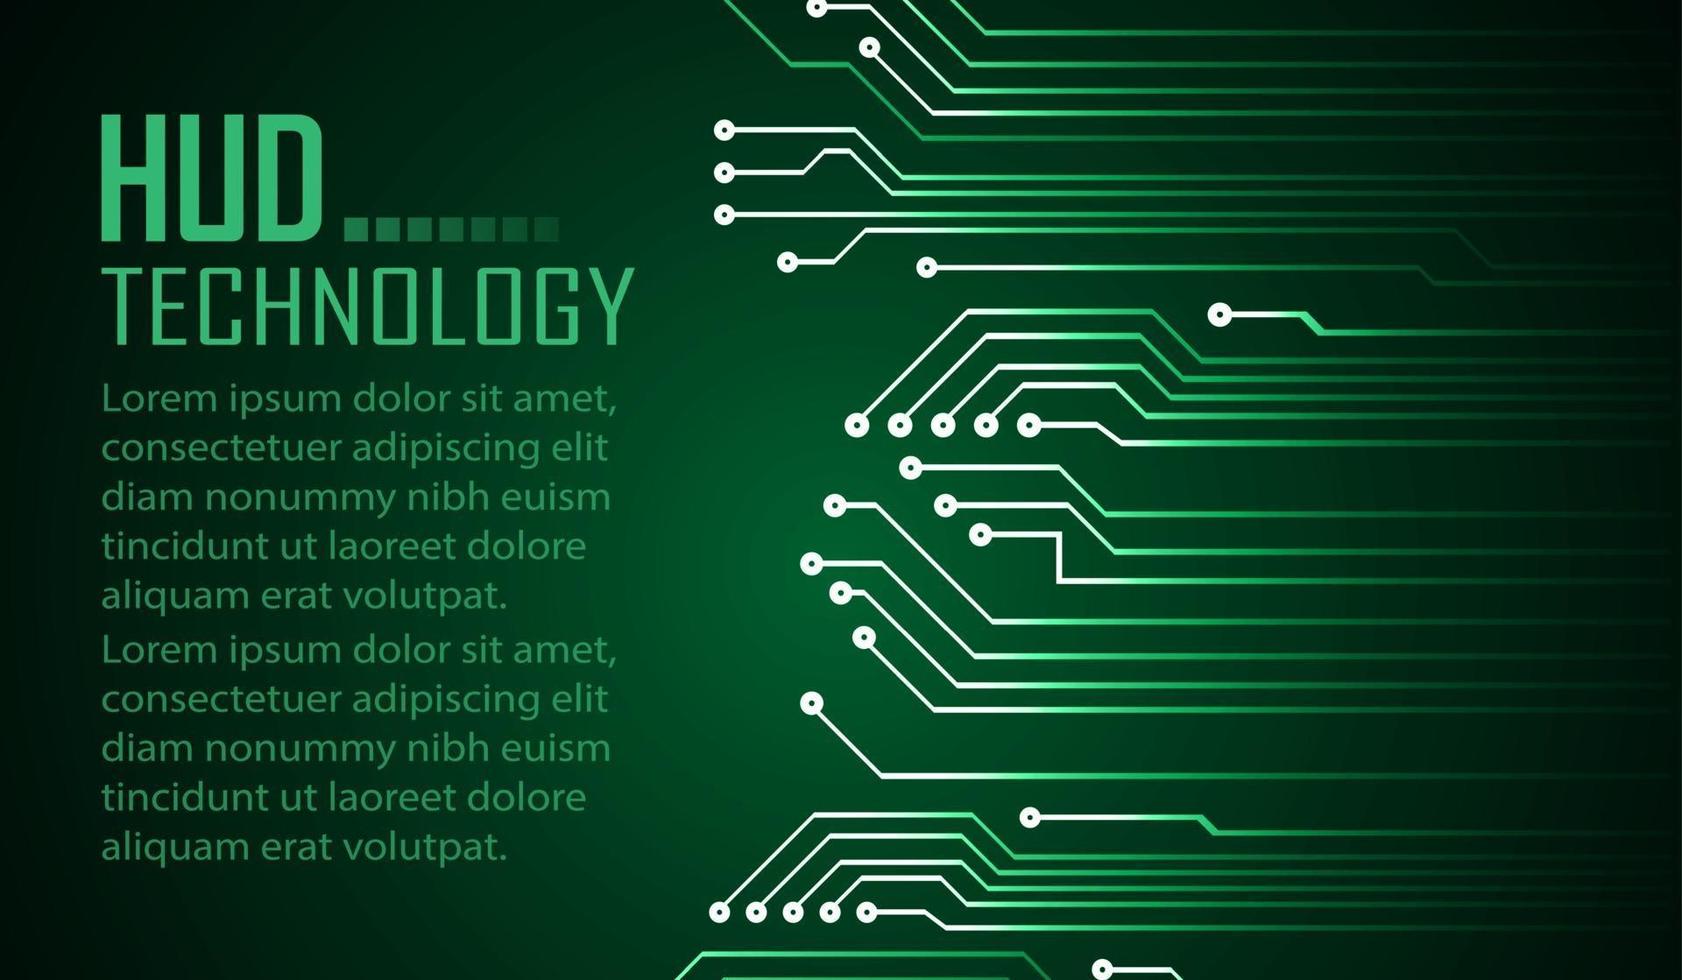 text cyber circuit future technology concept background vector